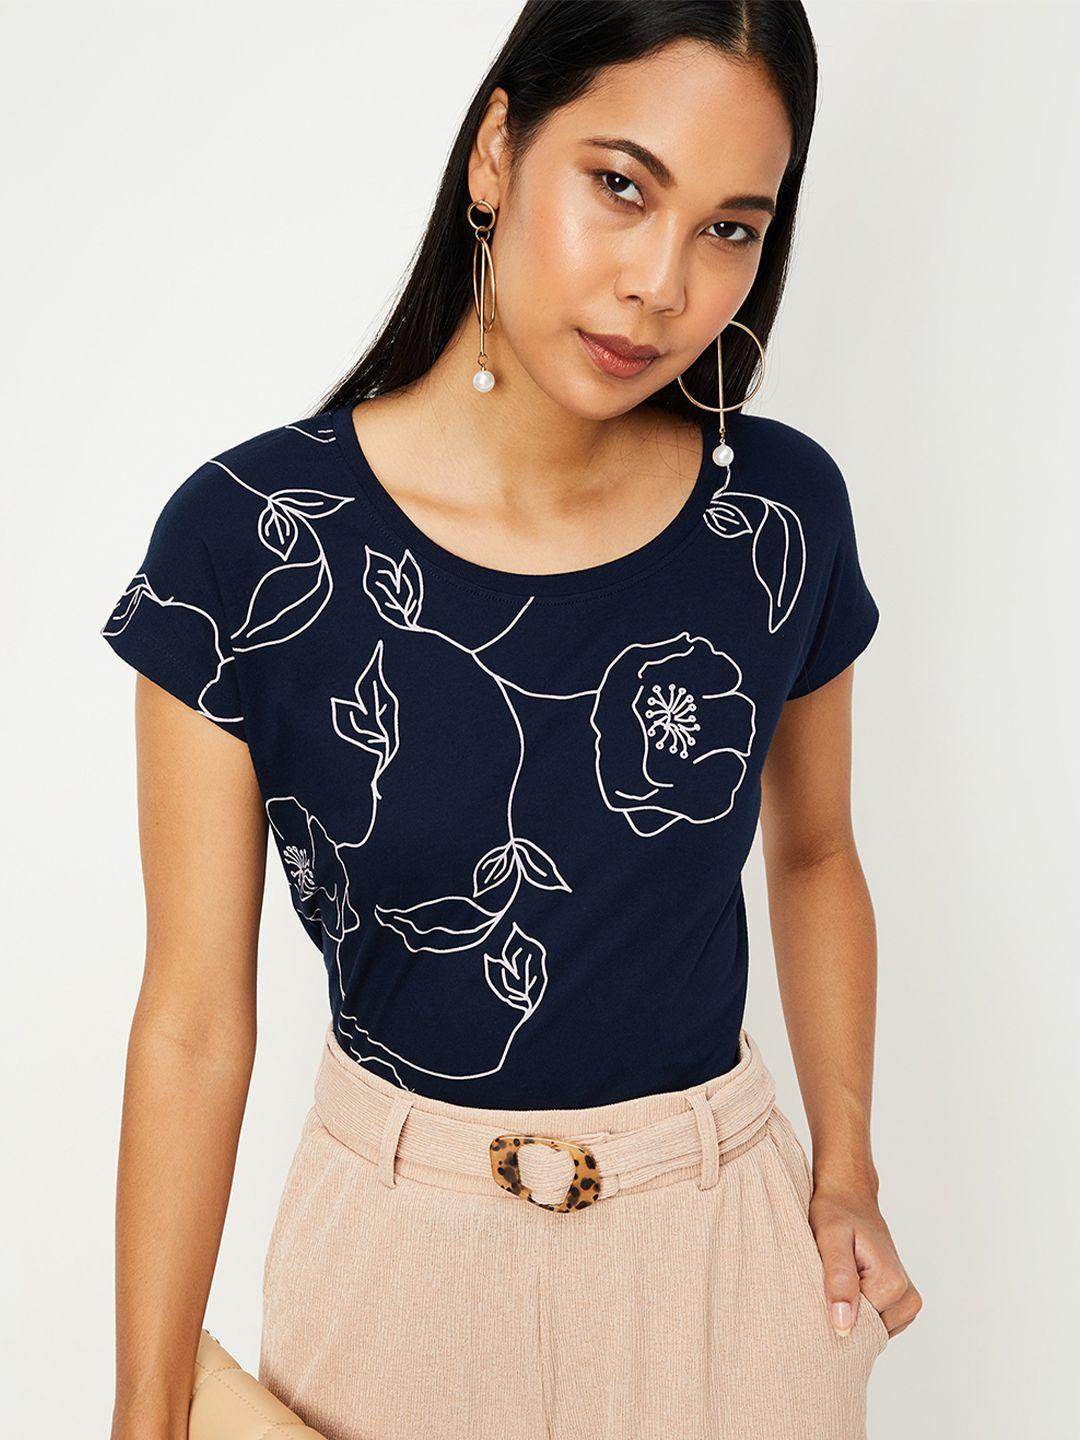 max-women-navy-blue-&-white-floral-printed-extended-sleeves-pure-cotton-t-shirt